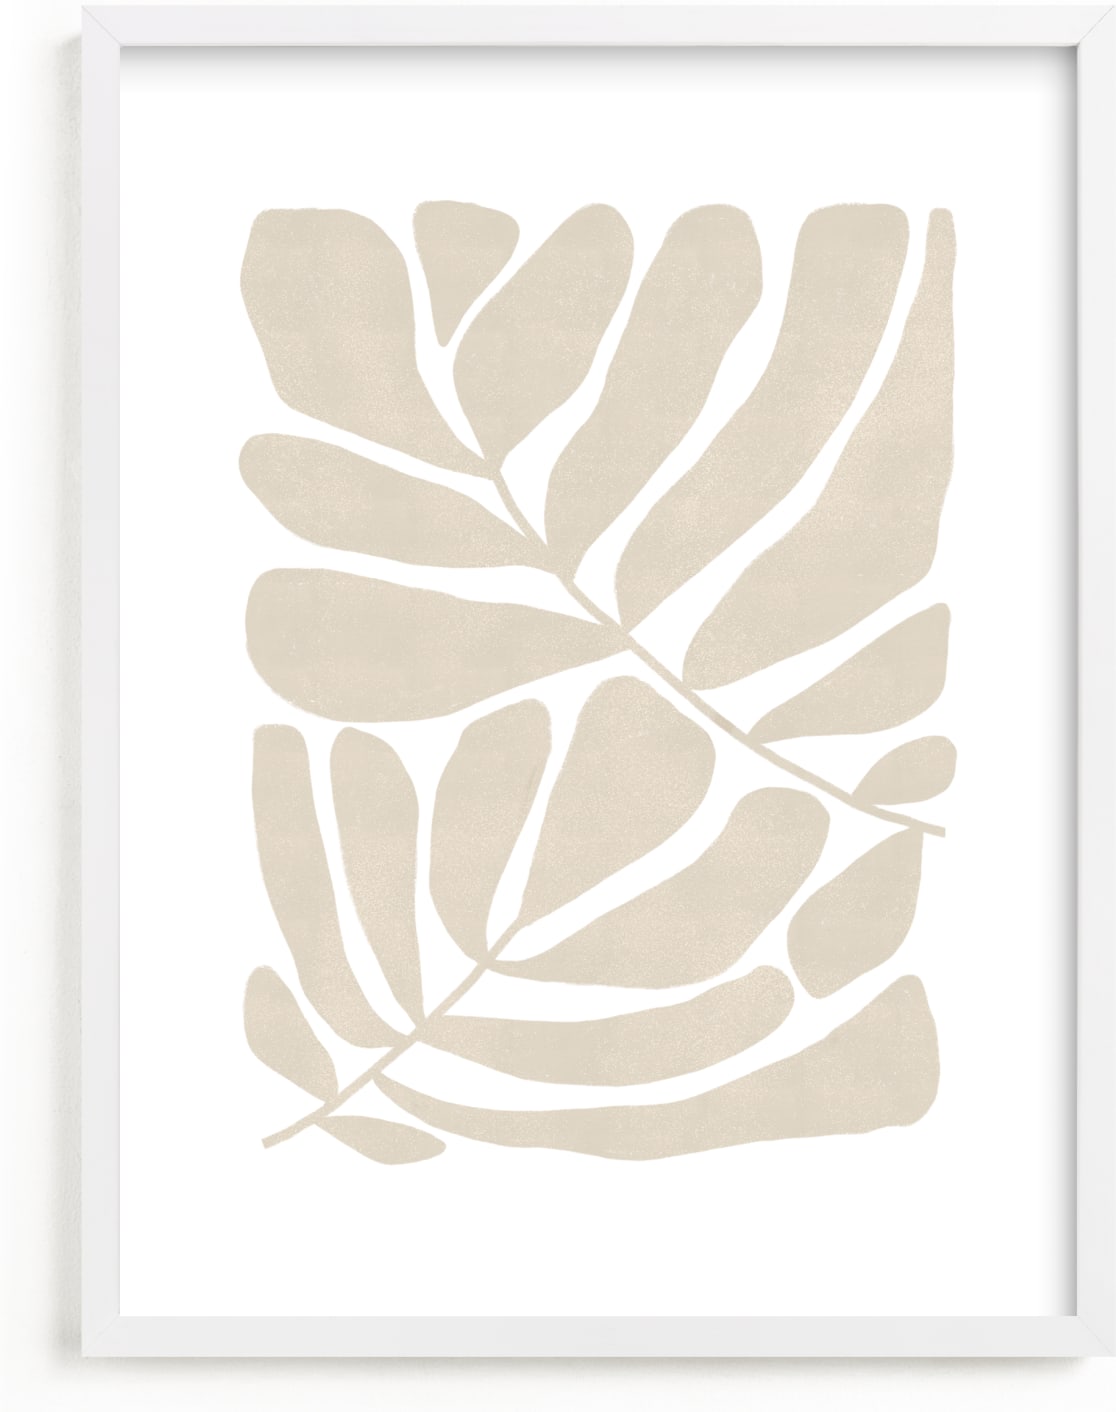 This is a ivory art by Kelly Ambrose called Loopy Leaves II.